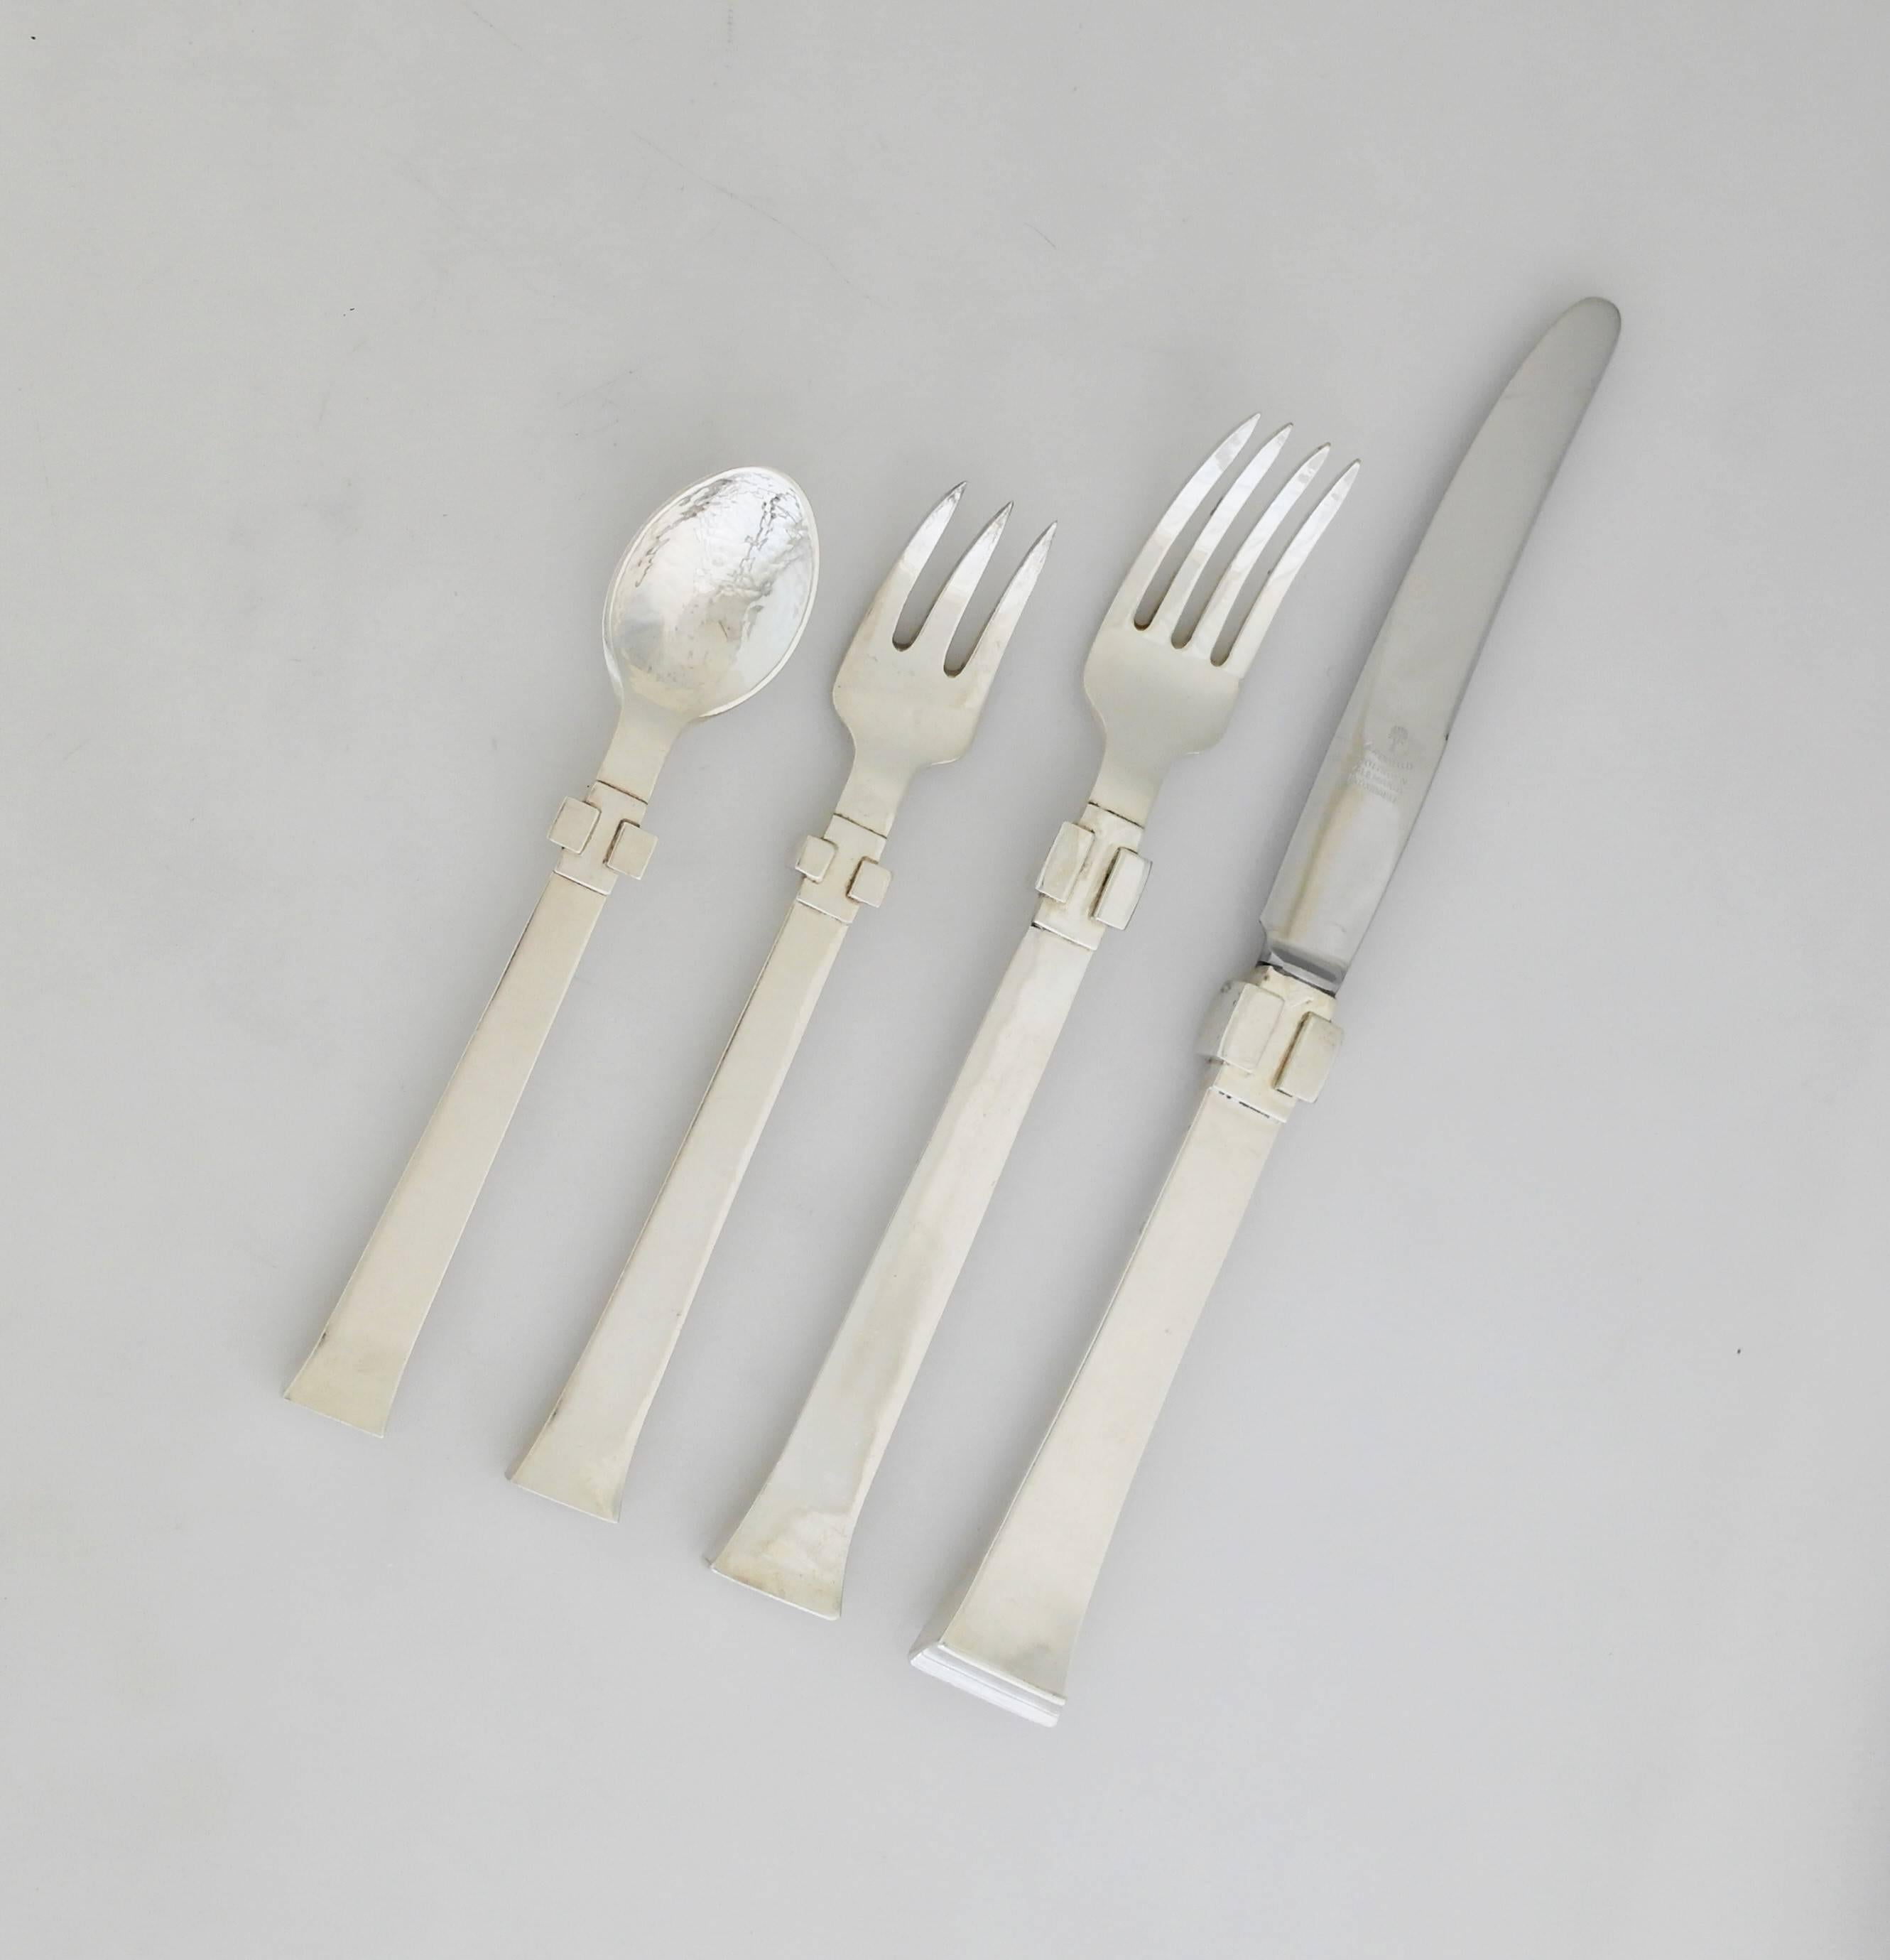 Being offered is a circa 1950 sterling silver flatware set by Antonio Pineda of Taxco, Mexico. Incredible flatware set comprising four piece place setting for eight, including the following:

Knife - 9 3/4